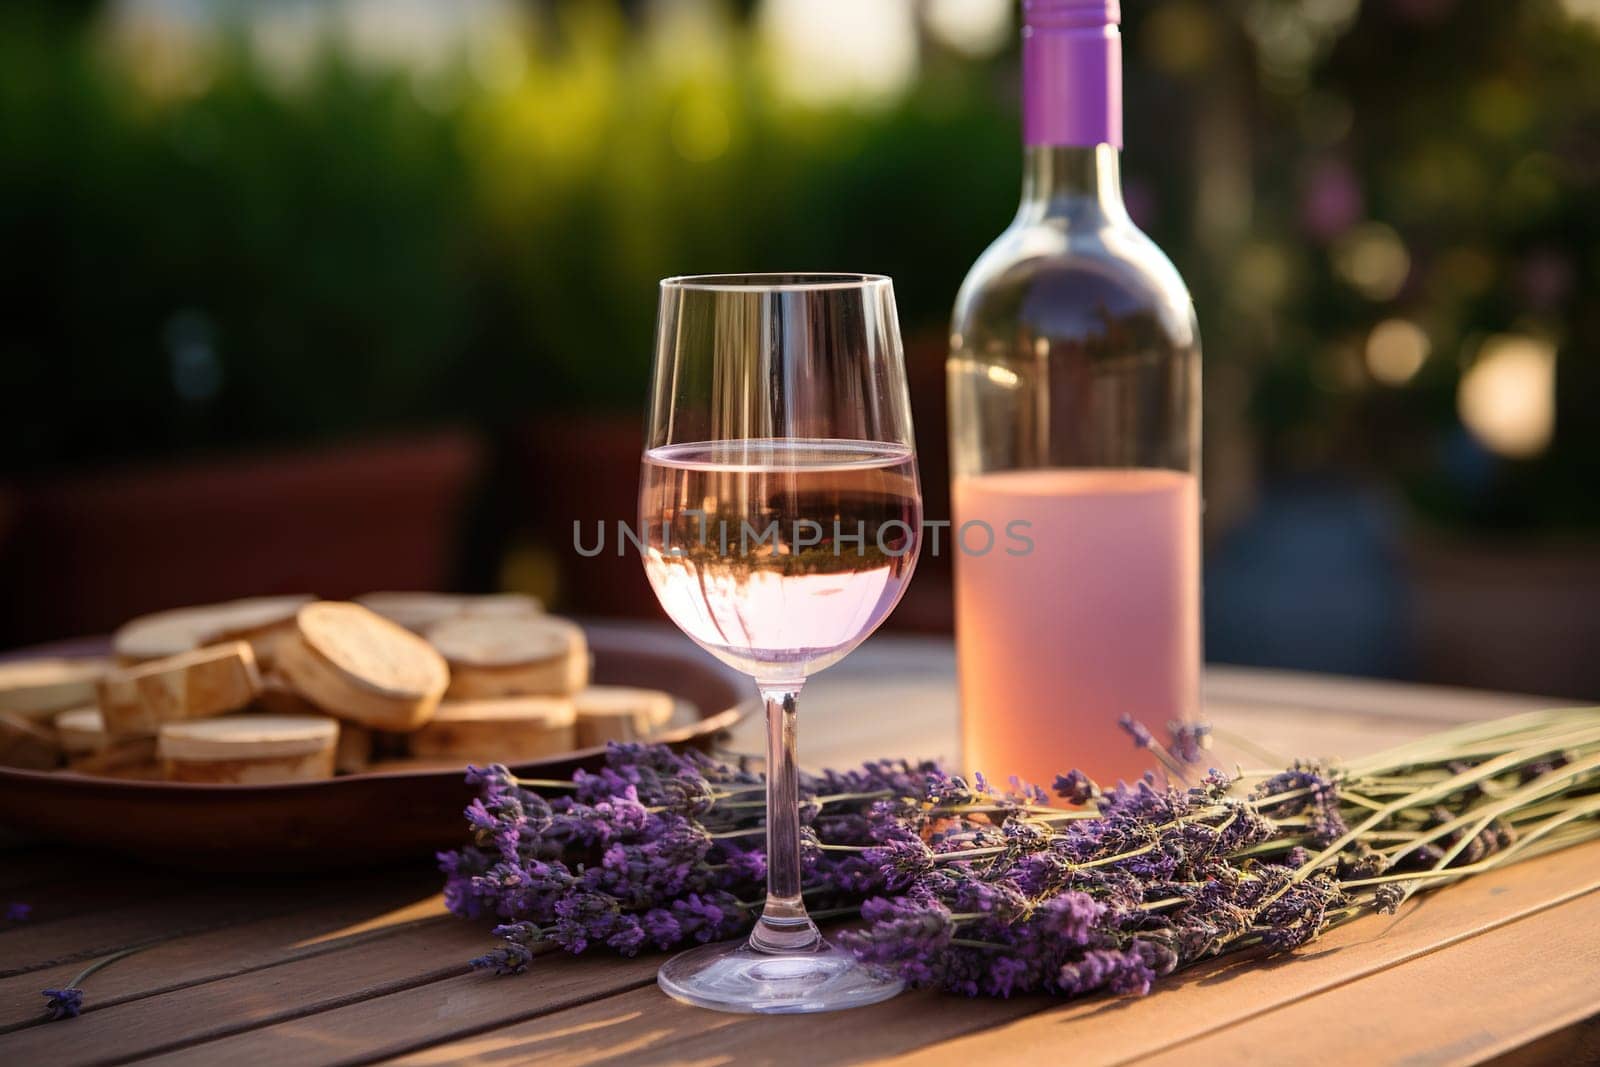 Glass of lavender wine on a wooden table in nature. Beautiful still life with lavender branches and a glass of wine. by Vovmar